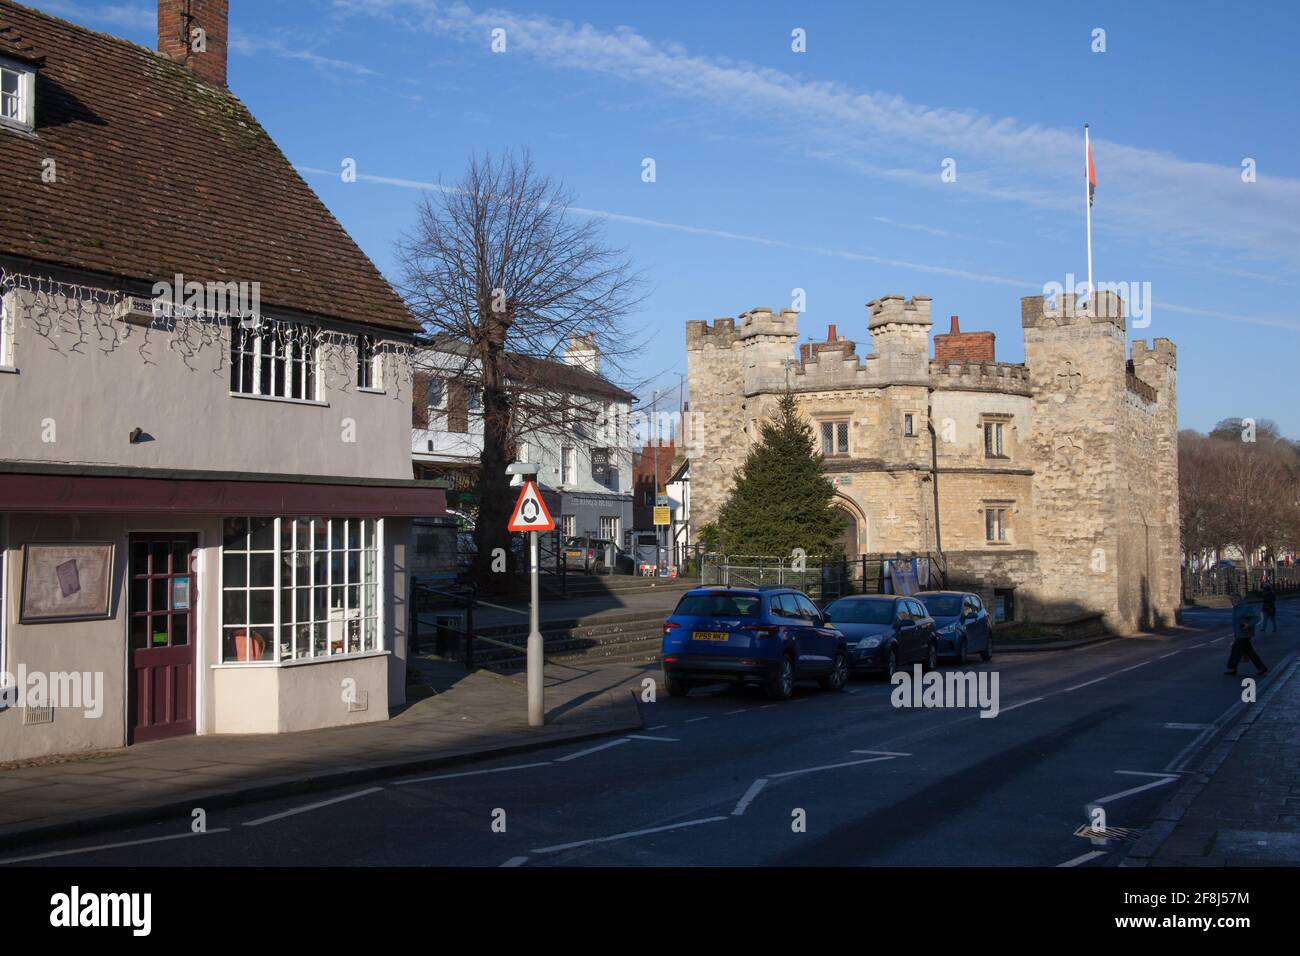 Views of Buckingham including the Old Gaol Museum in Buckinghamshire in the UK Stock Photo